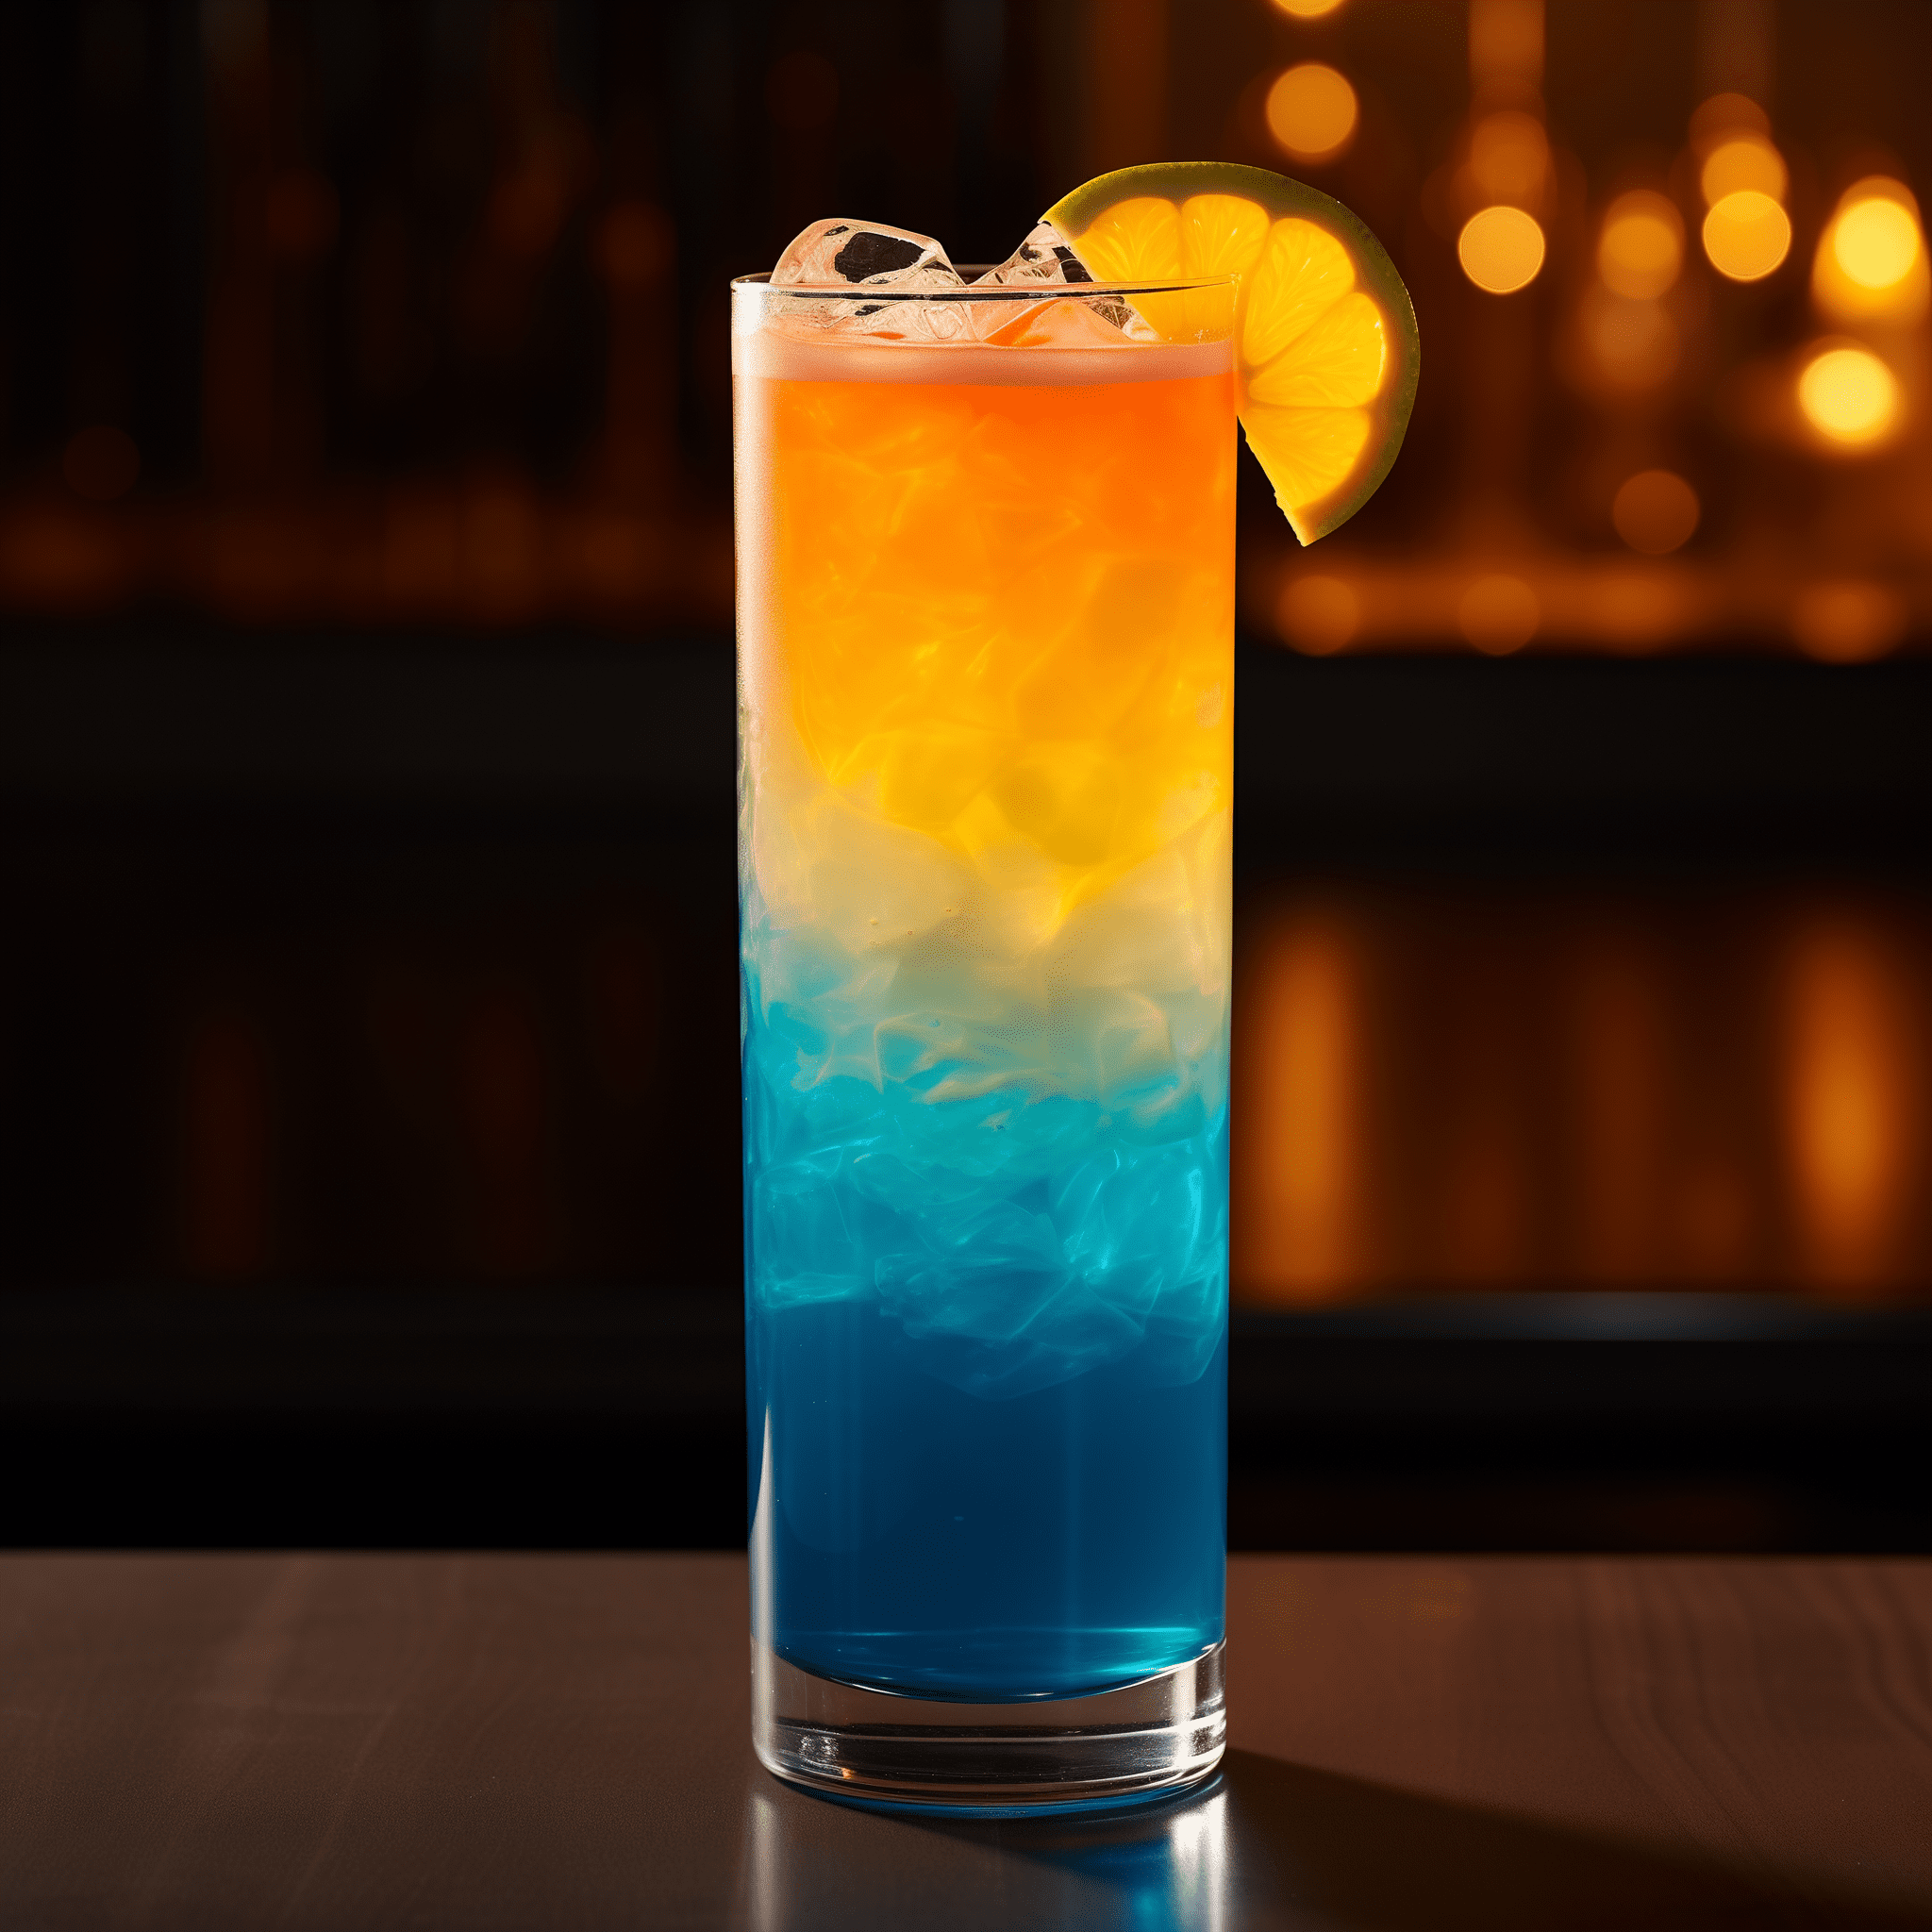 Blue Booty Cocktail Recipe - The Blue Booty cocktail is a delightful fusion of sweet and tangy flavors, with a robust kick from the combination of white and dark rums. The Malibu Rum adds a smooth coconut undertone, while the blue curaçao imparts a citrusy orange note that complements the tropical pineapple and orange juices. It's a strong yet balanced drink with a fruity and refreshing taste.